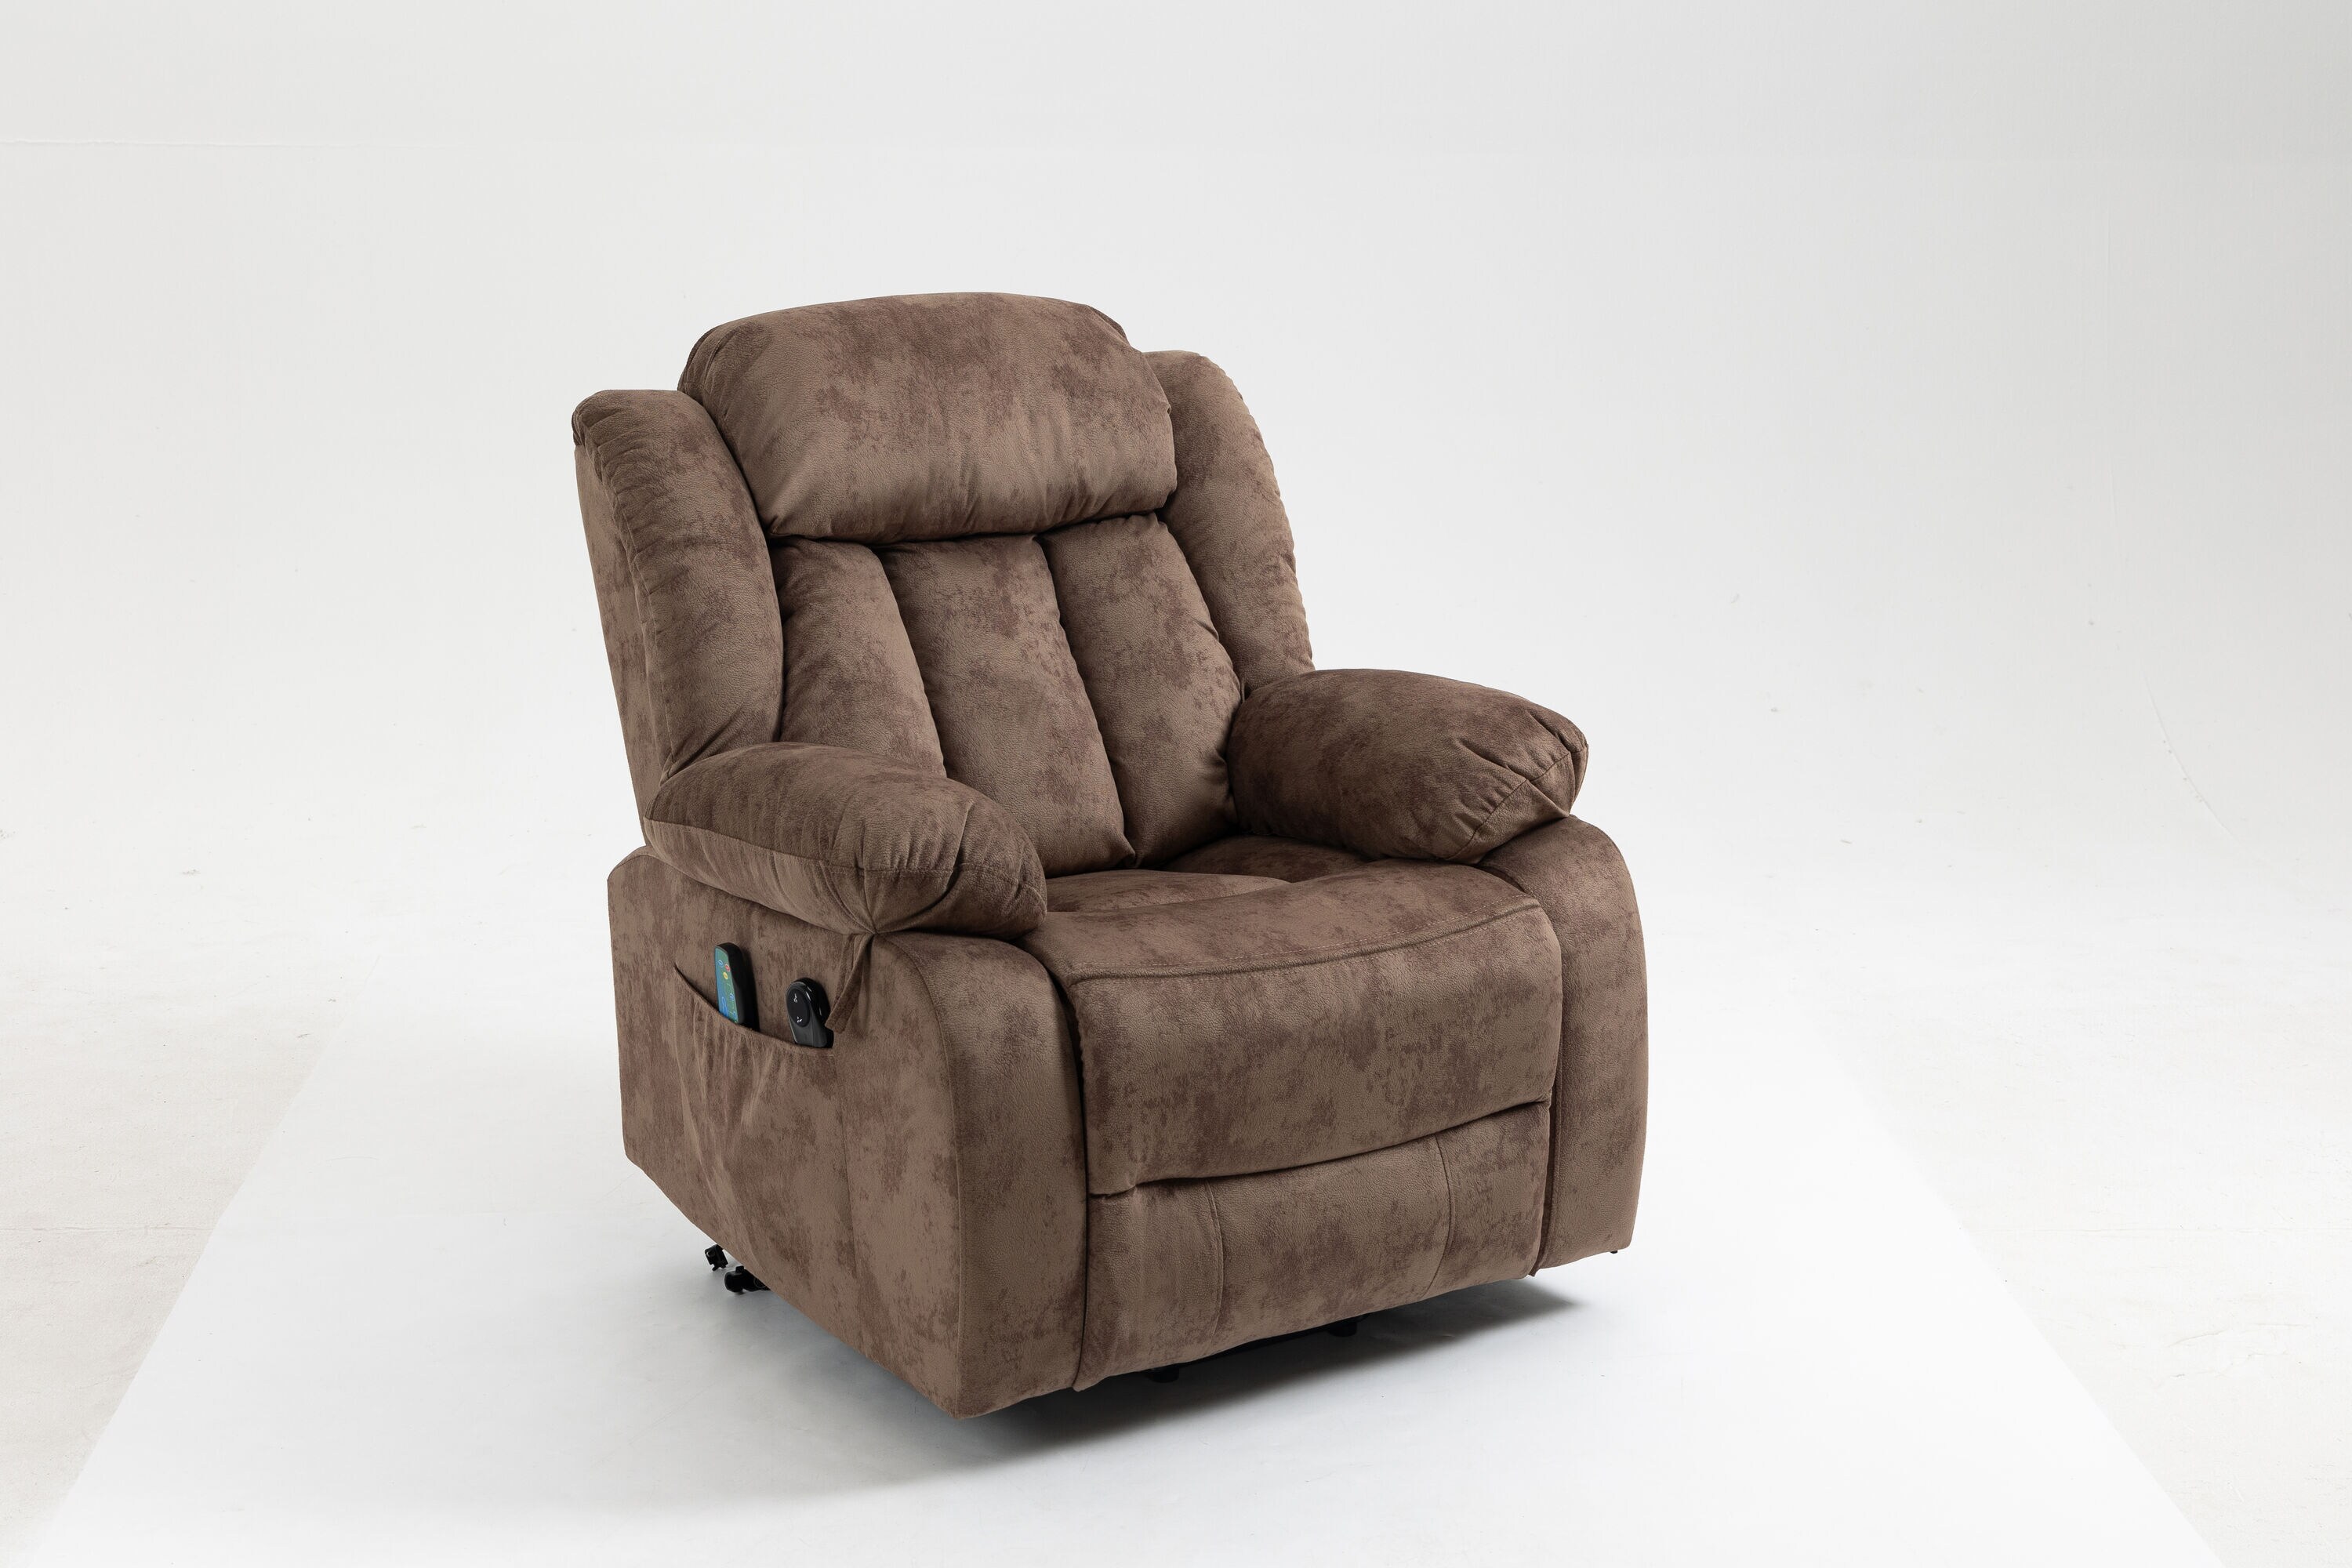 WELLFOR Power Lift Recliner Chair for Elderly Red Polyester Upholstered Tufted Powered Reclining Recliner with Lift Assistance | CAN-JR146